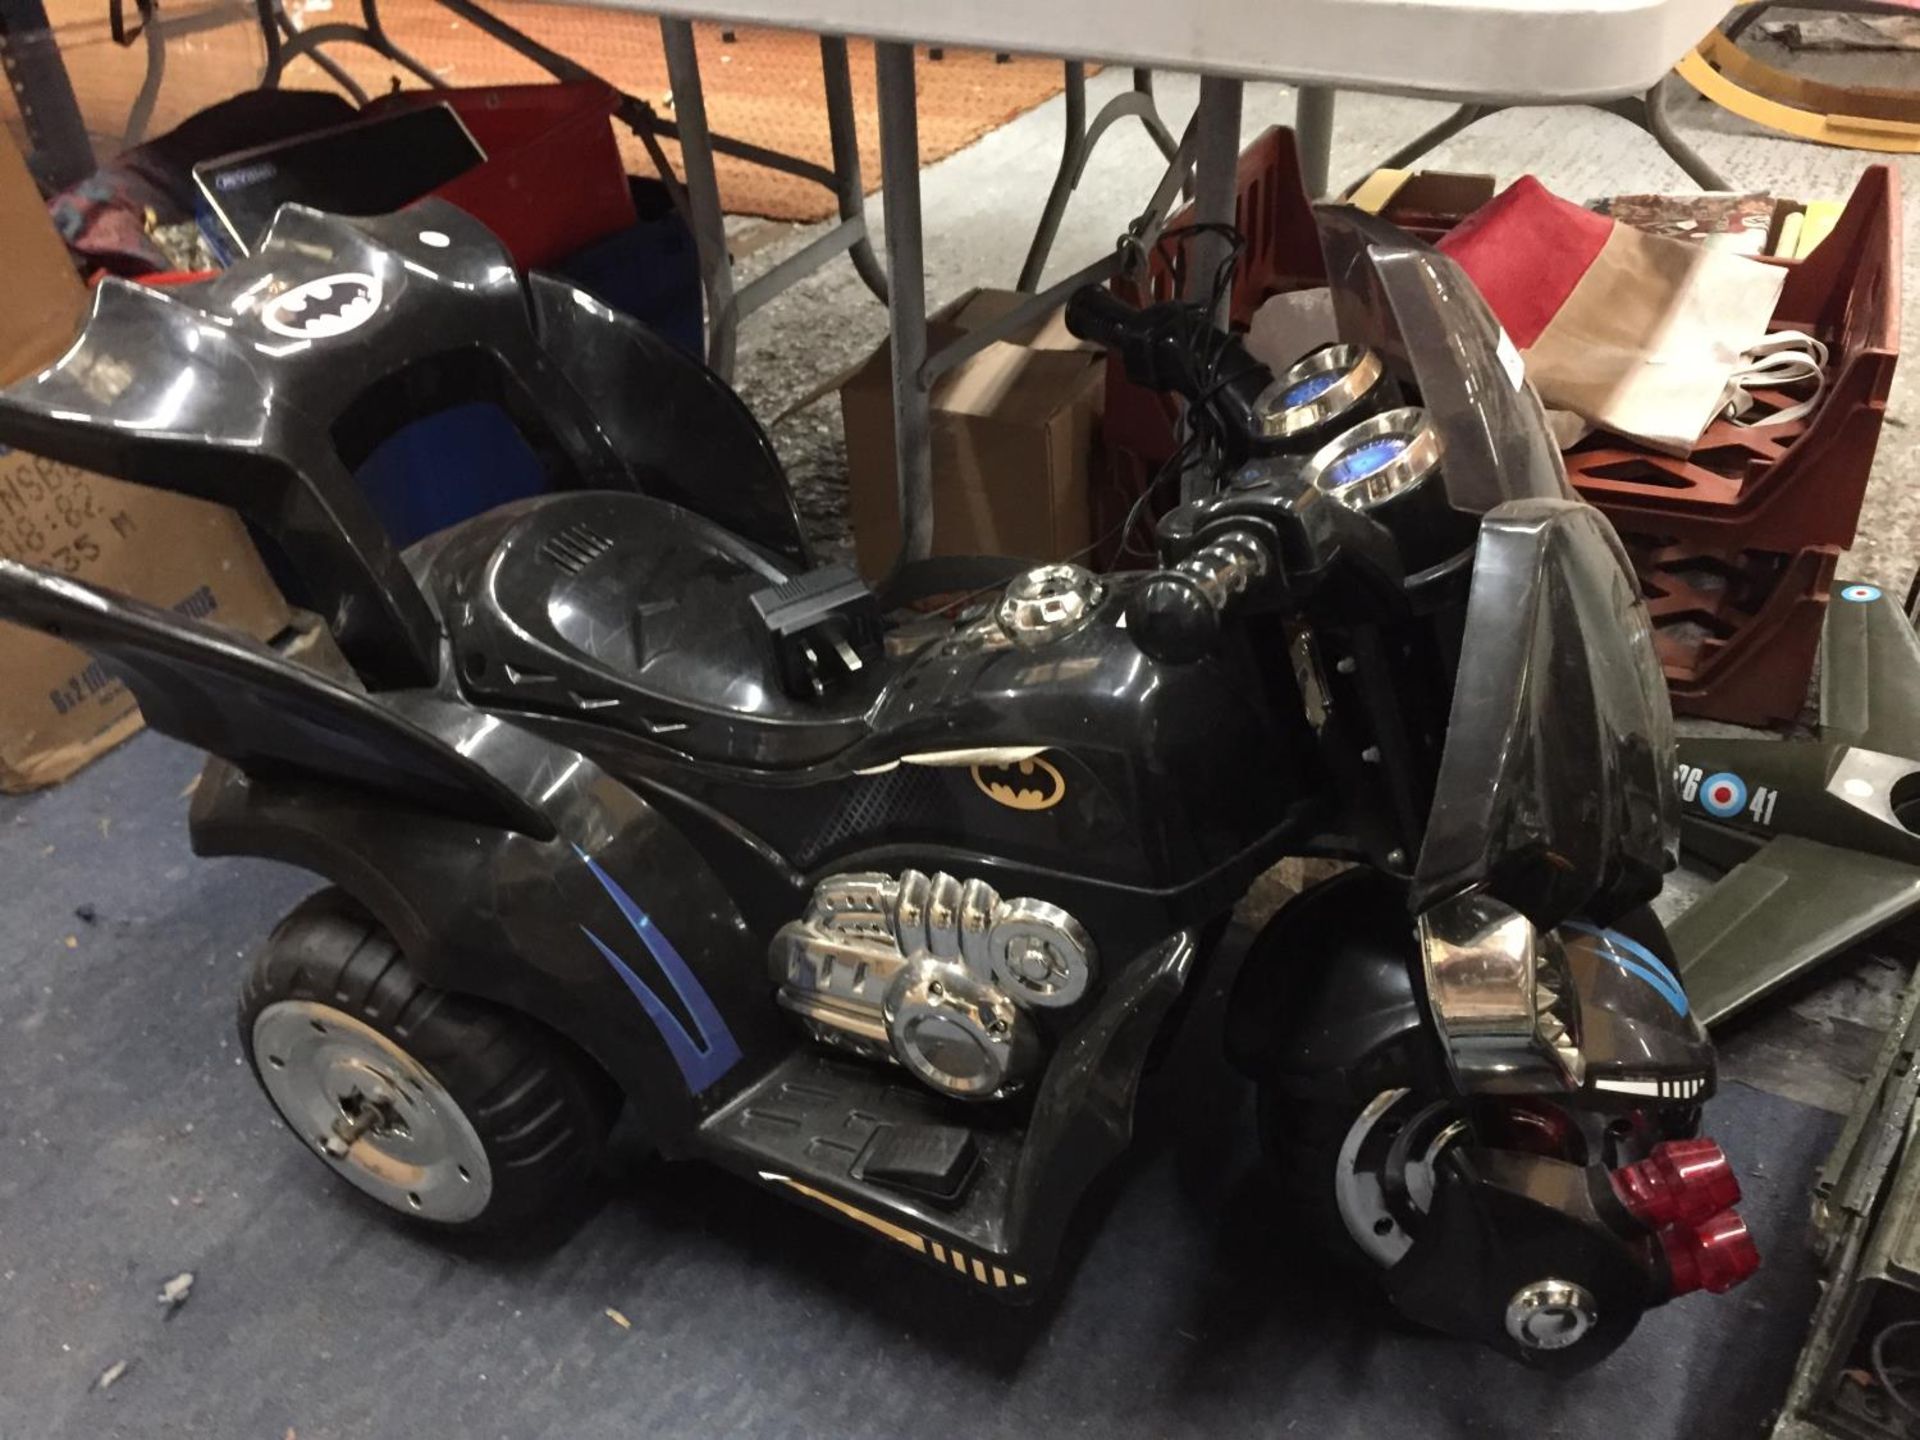 A 'BATMAN' BATTERY POWERED CHILD'S THREE WHEELED BIKE WITH CHARGER